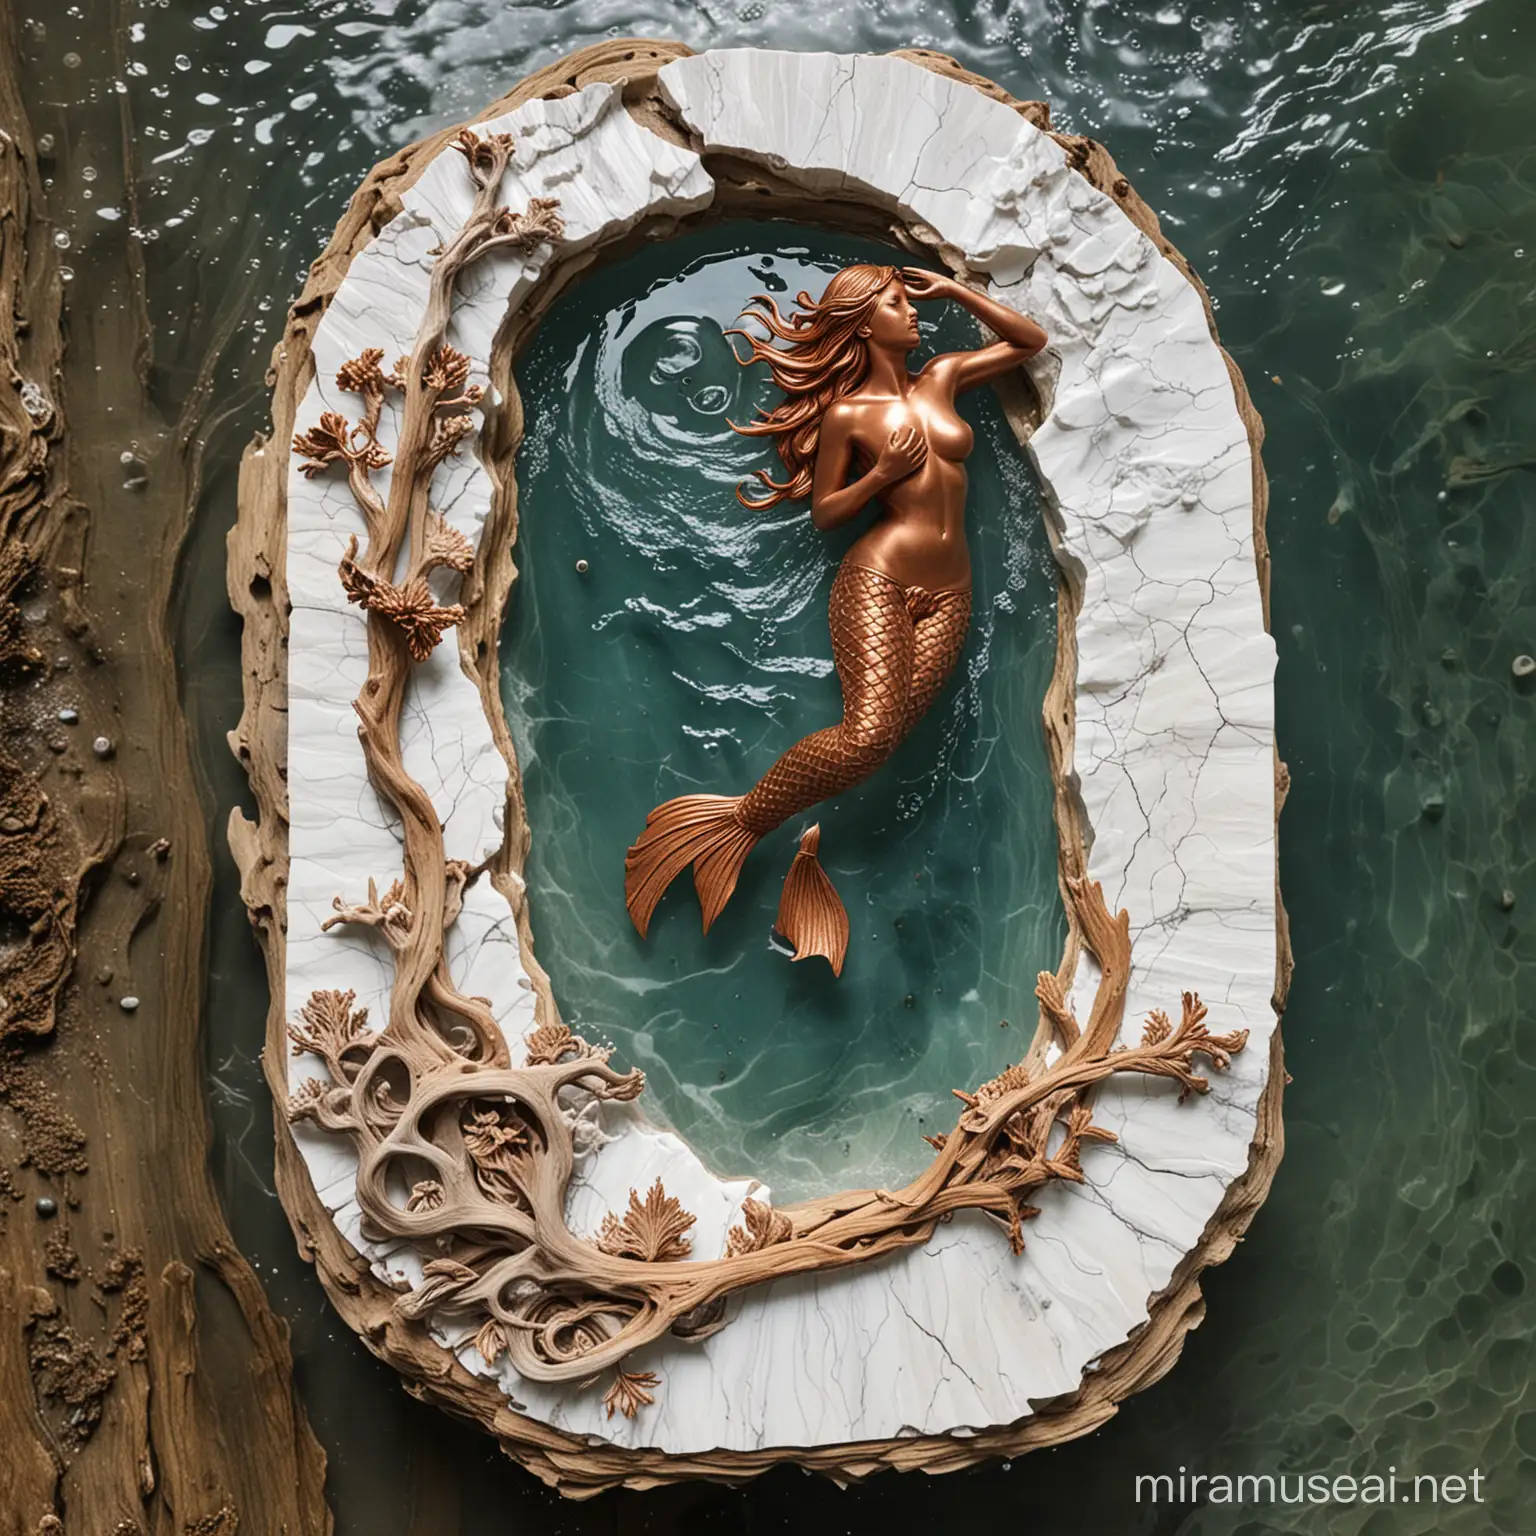 a large slab of white marble with beautiful veins, a shiny copper mermaid figure is centred on the slab, these items are fully submerged under water, a piece of driftwood floats at the side